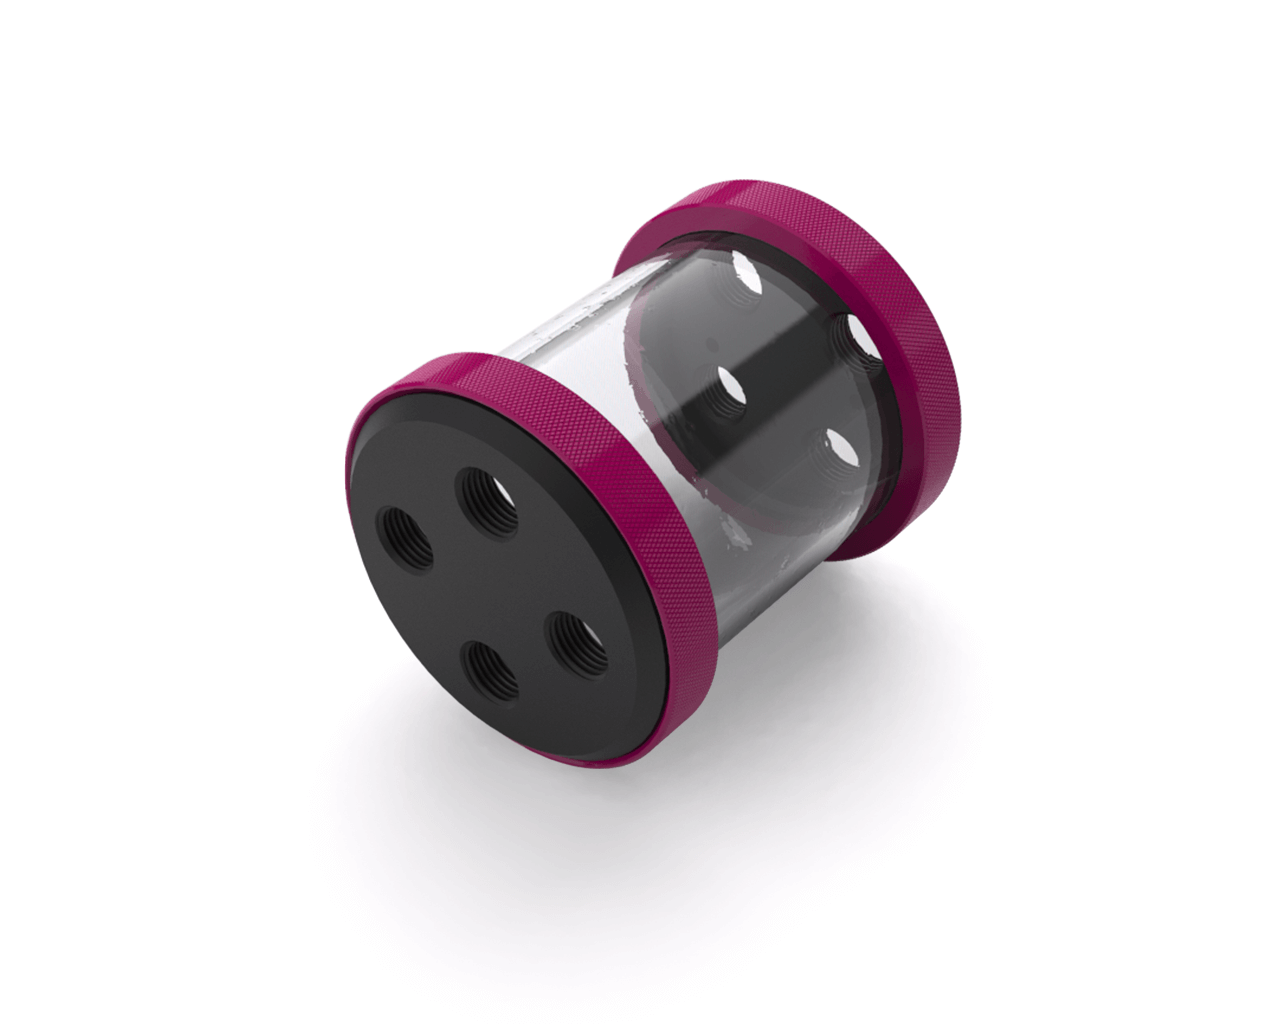 PrimoChill CTR Low Profile Phase II Reservoir - Black POM - 80mm - PrimoChill - KEEPING IT COOL Magenta